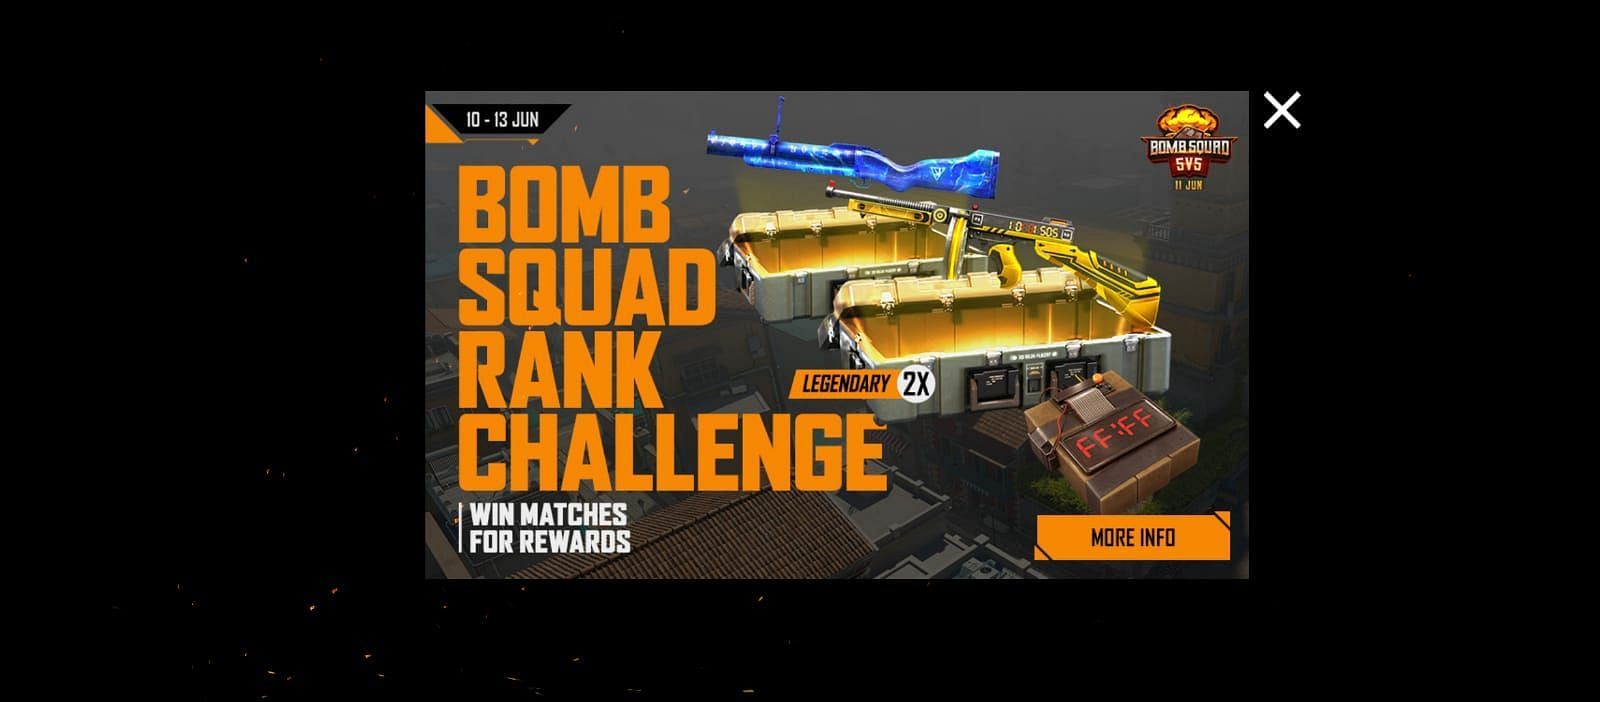 The Bomb Squad Rank Challenge is a mission-based event (Image via Garena)